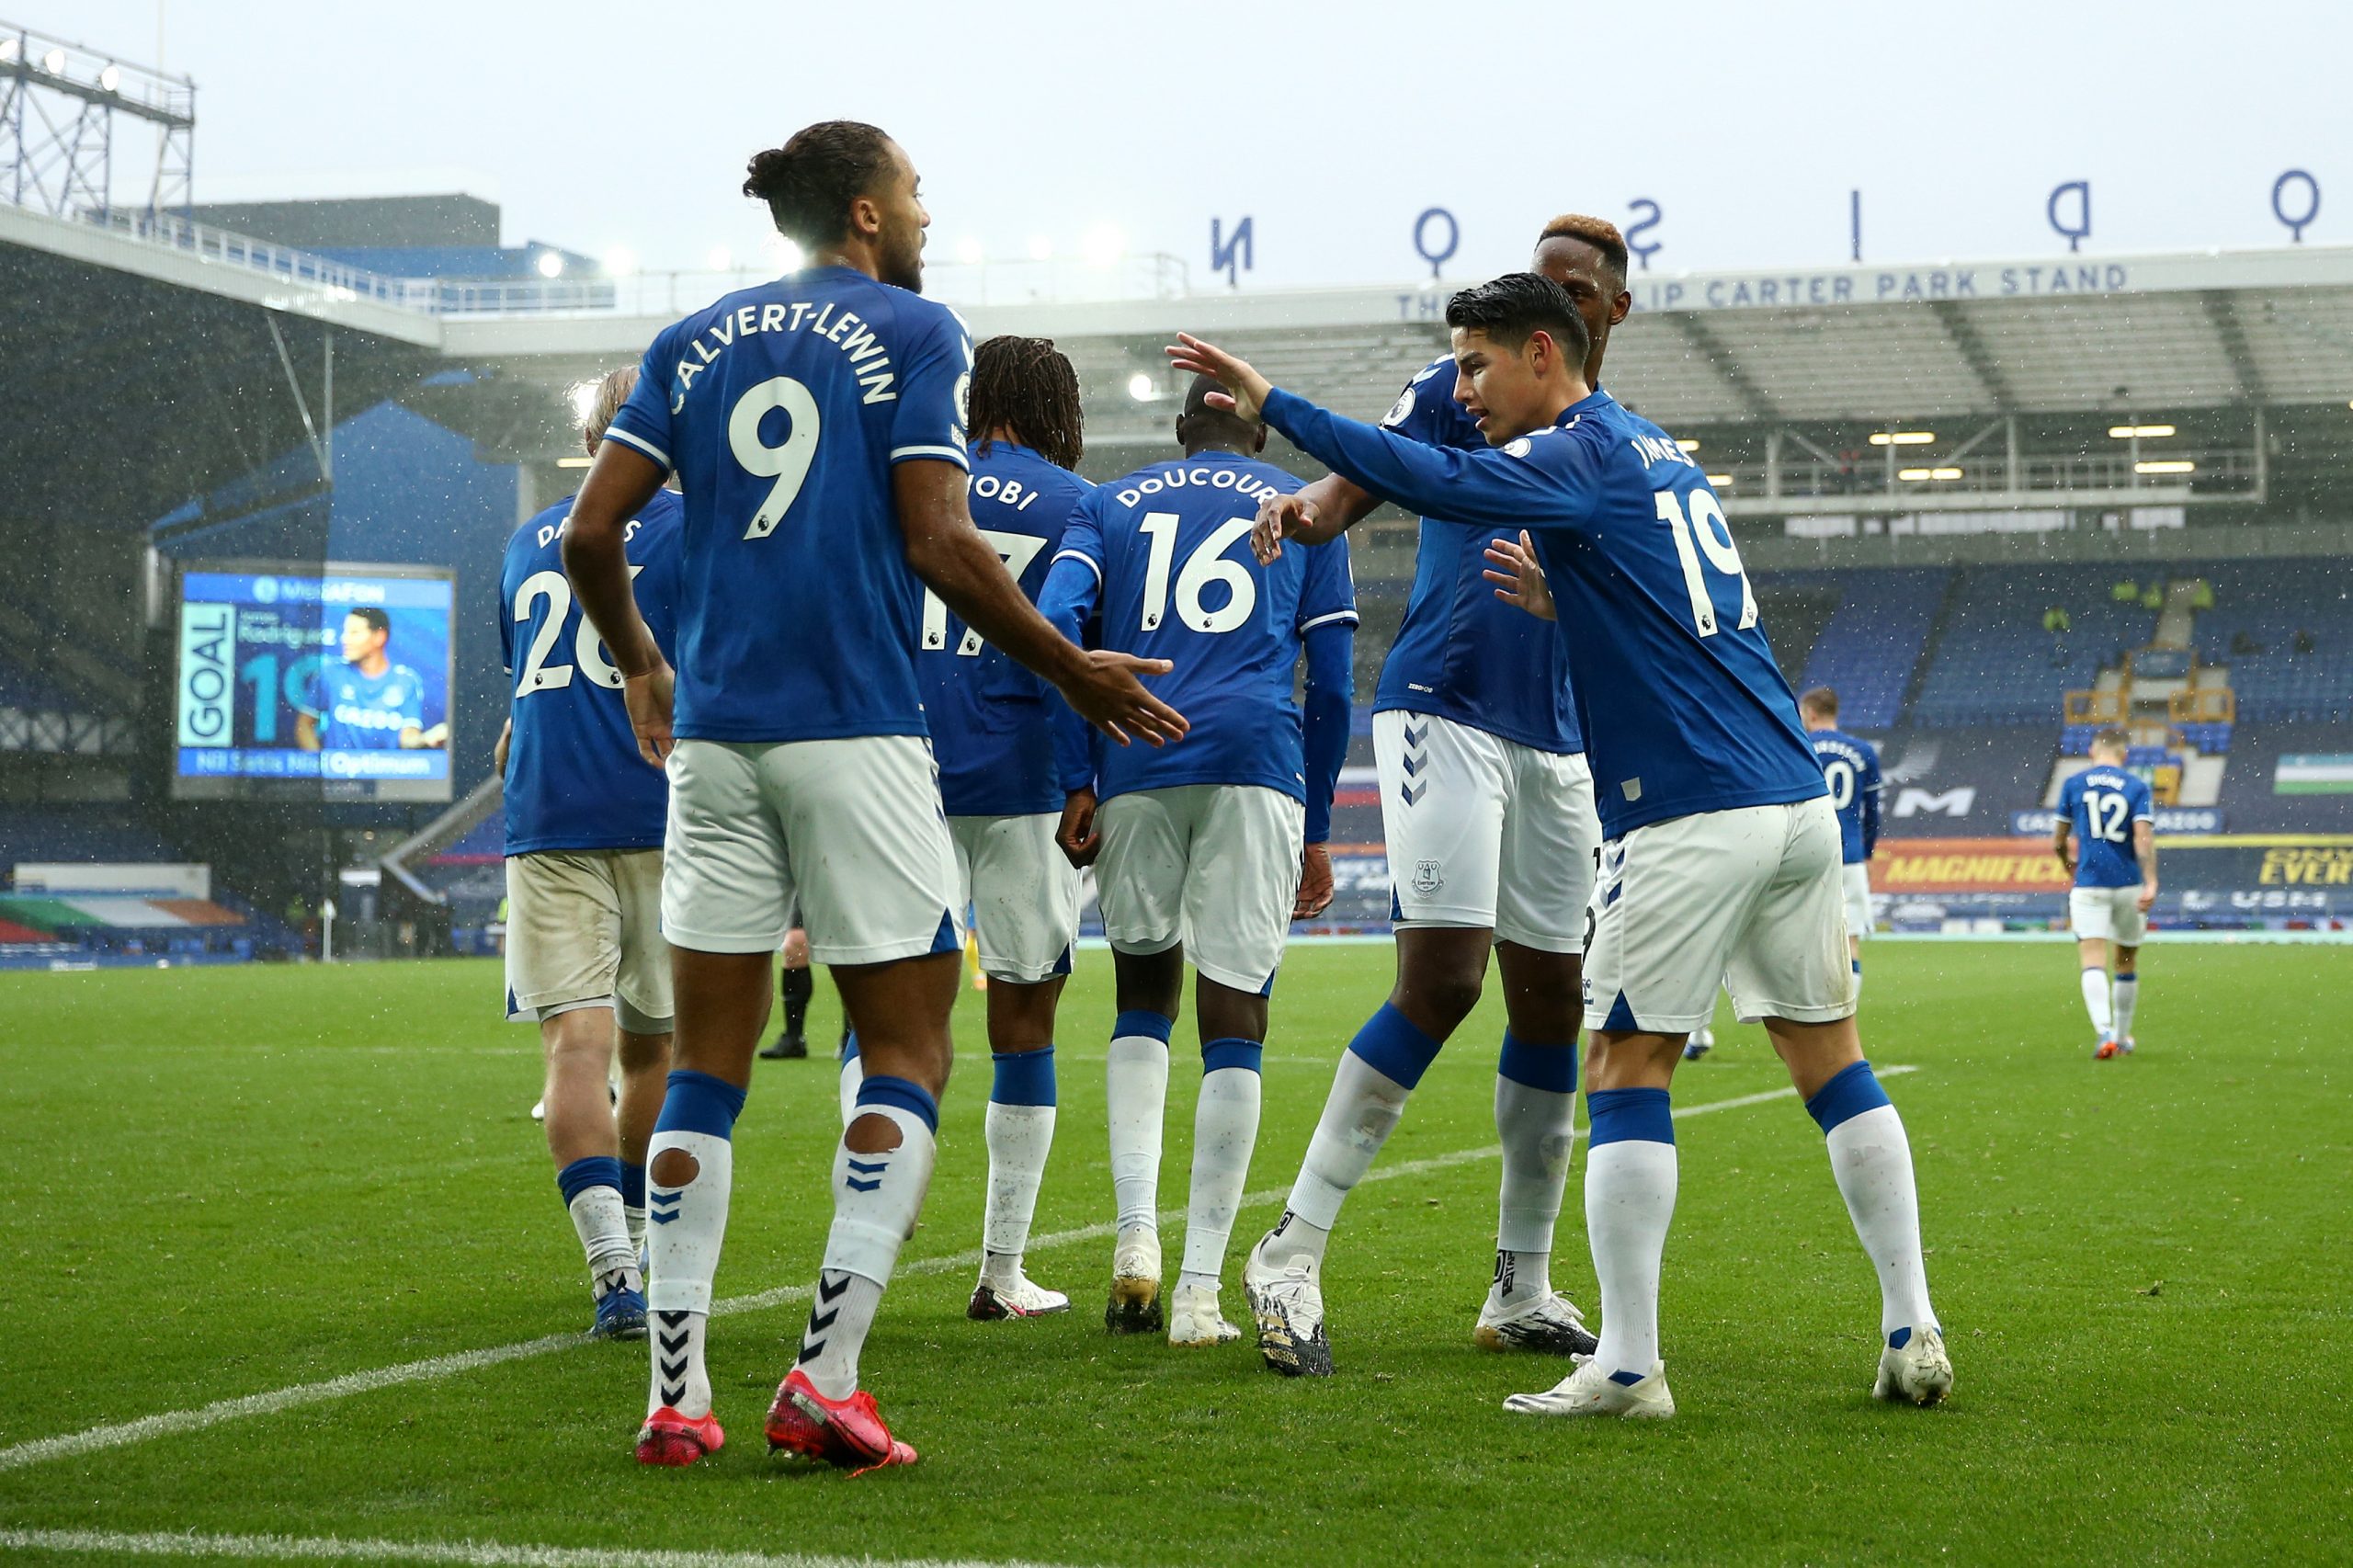 4-3-3 Everton Predicted Lineup Vs Leicester City (Everton players are celebrating in the photo)